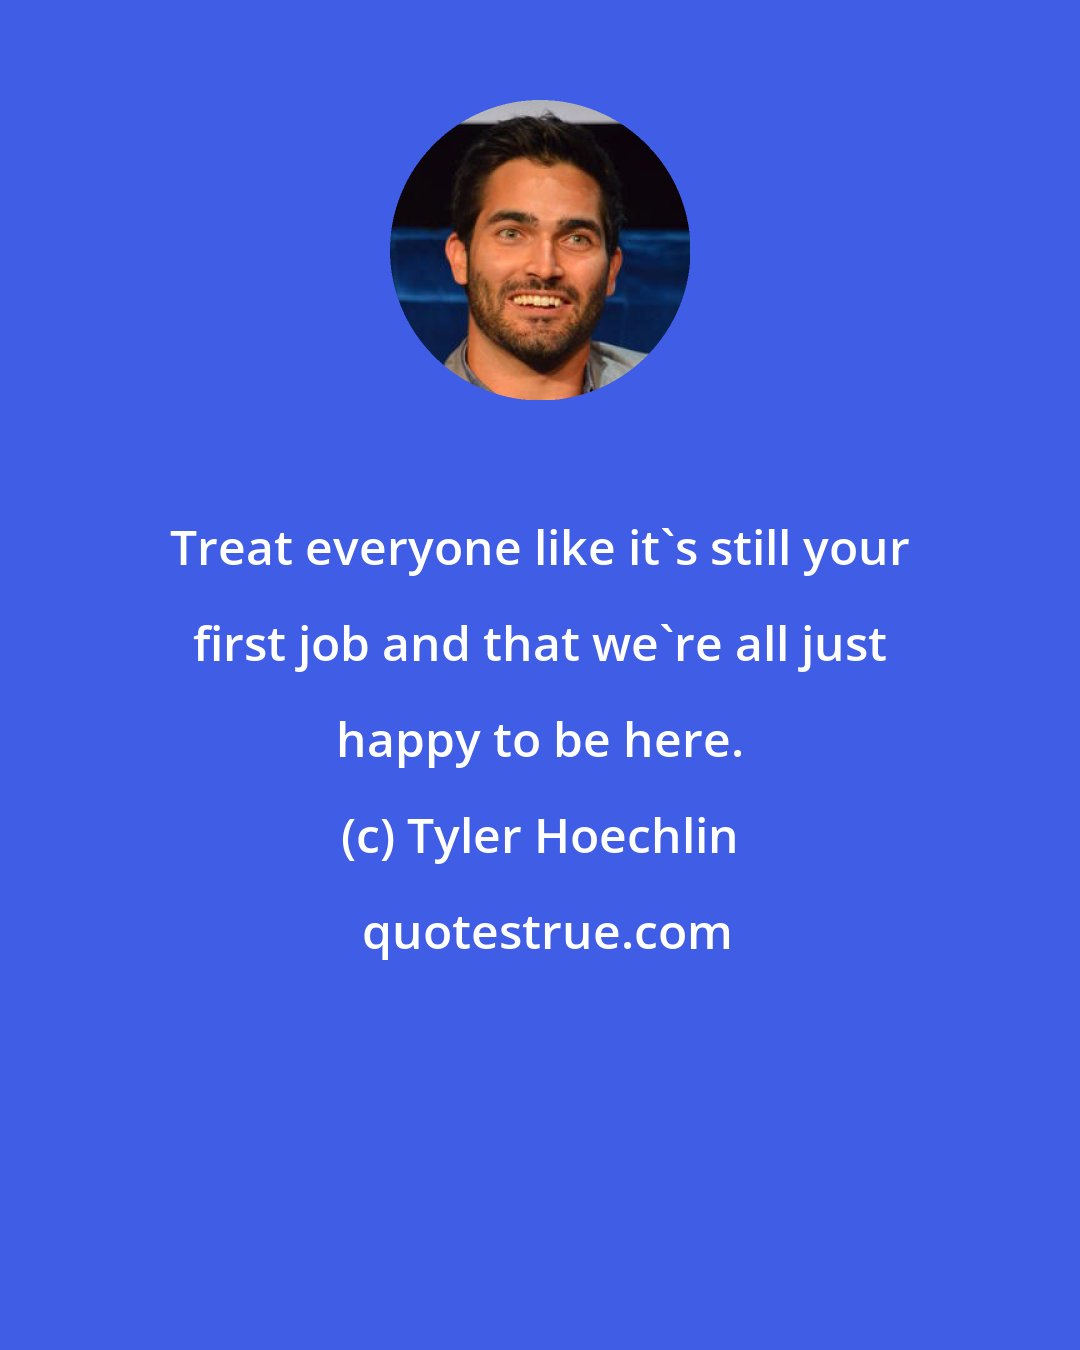 Tyler Hoechlin: Treat everyone like it's still your first job and that we're all just happy to be here.